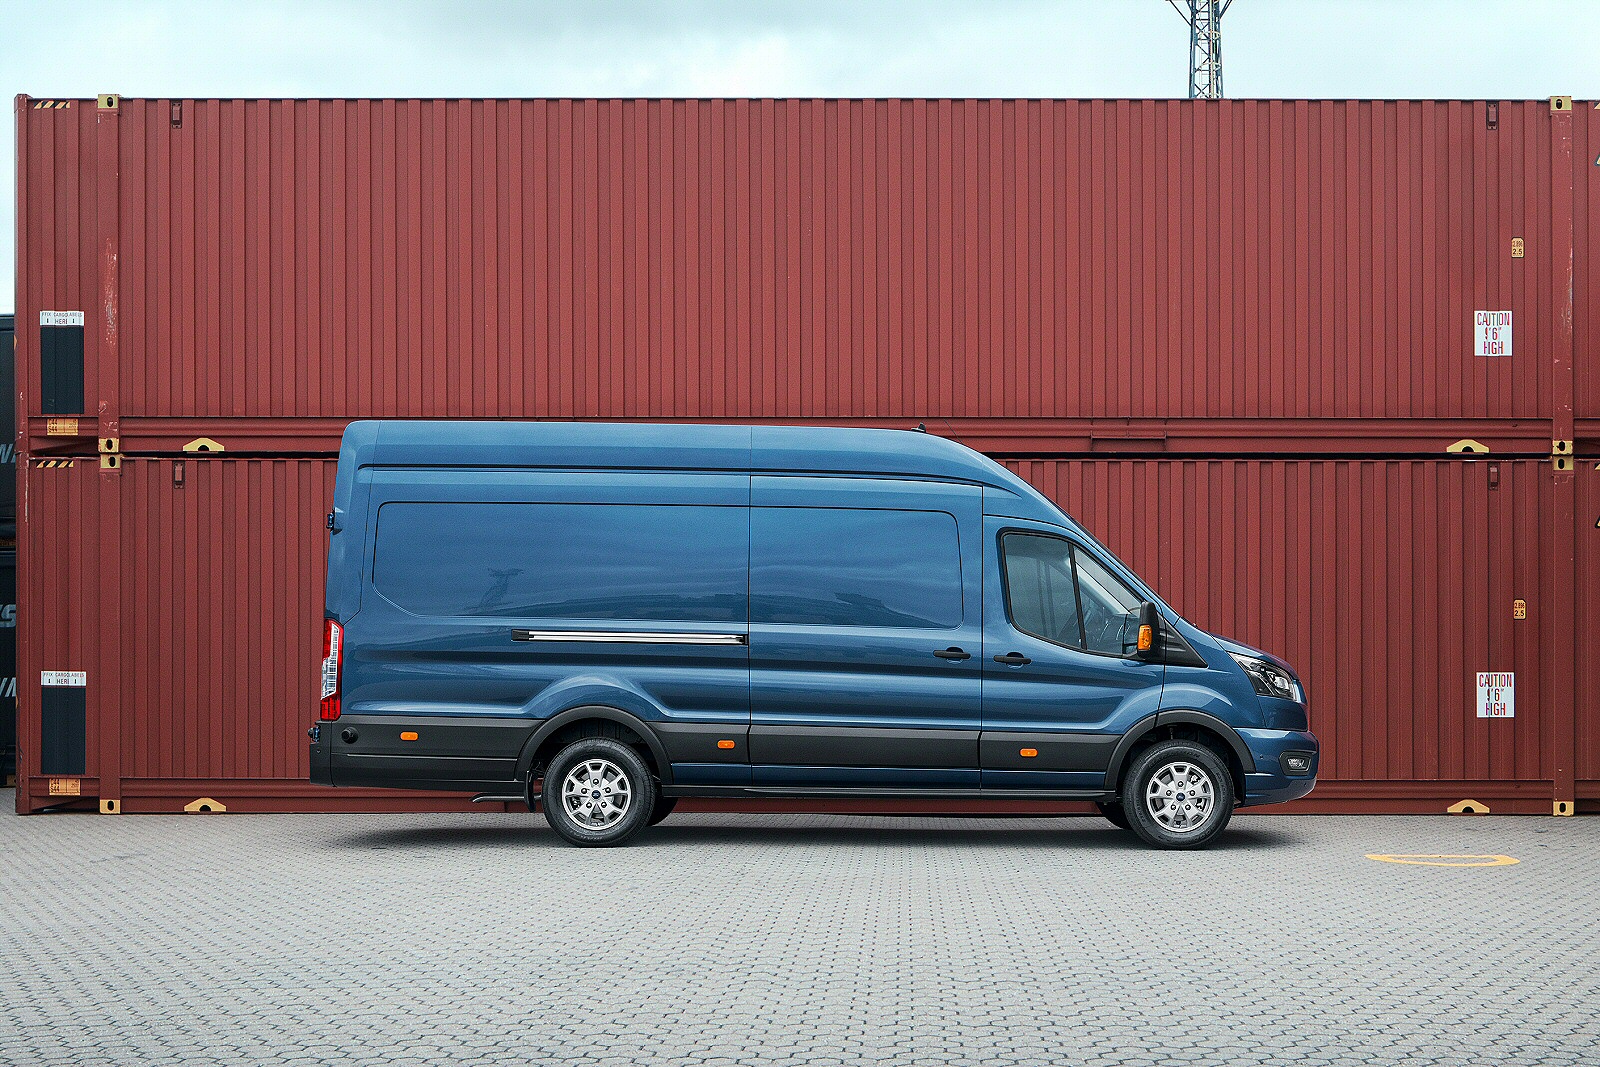 FORD E-TRANSIT 350 L4 RWD 135kW 68kWh Trend Chassis Cab Auto